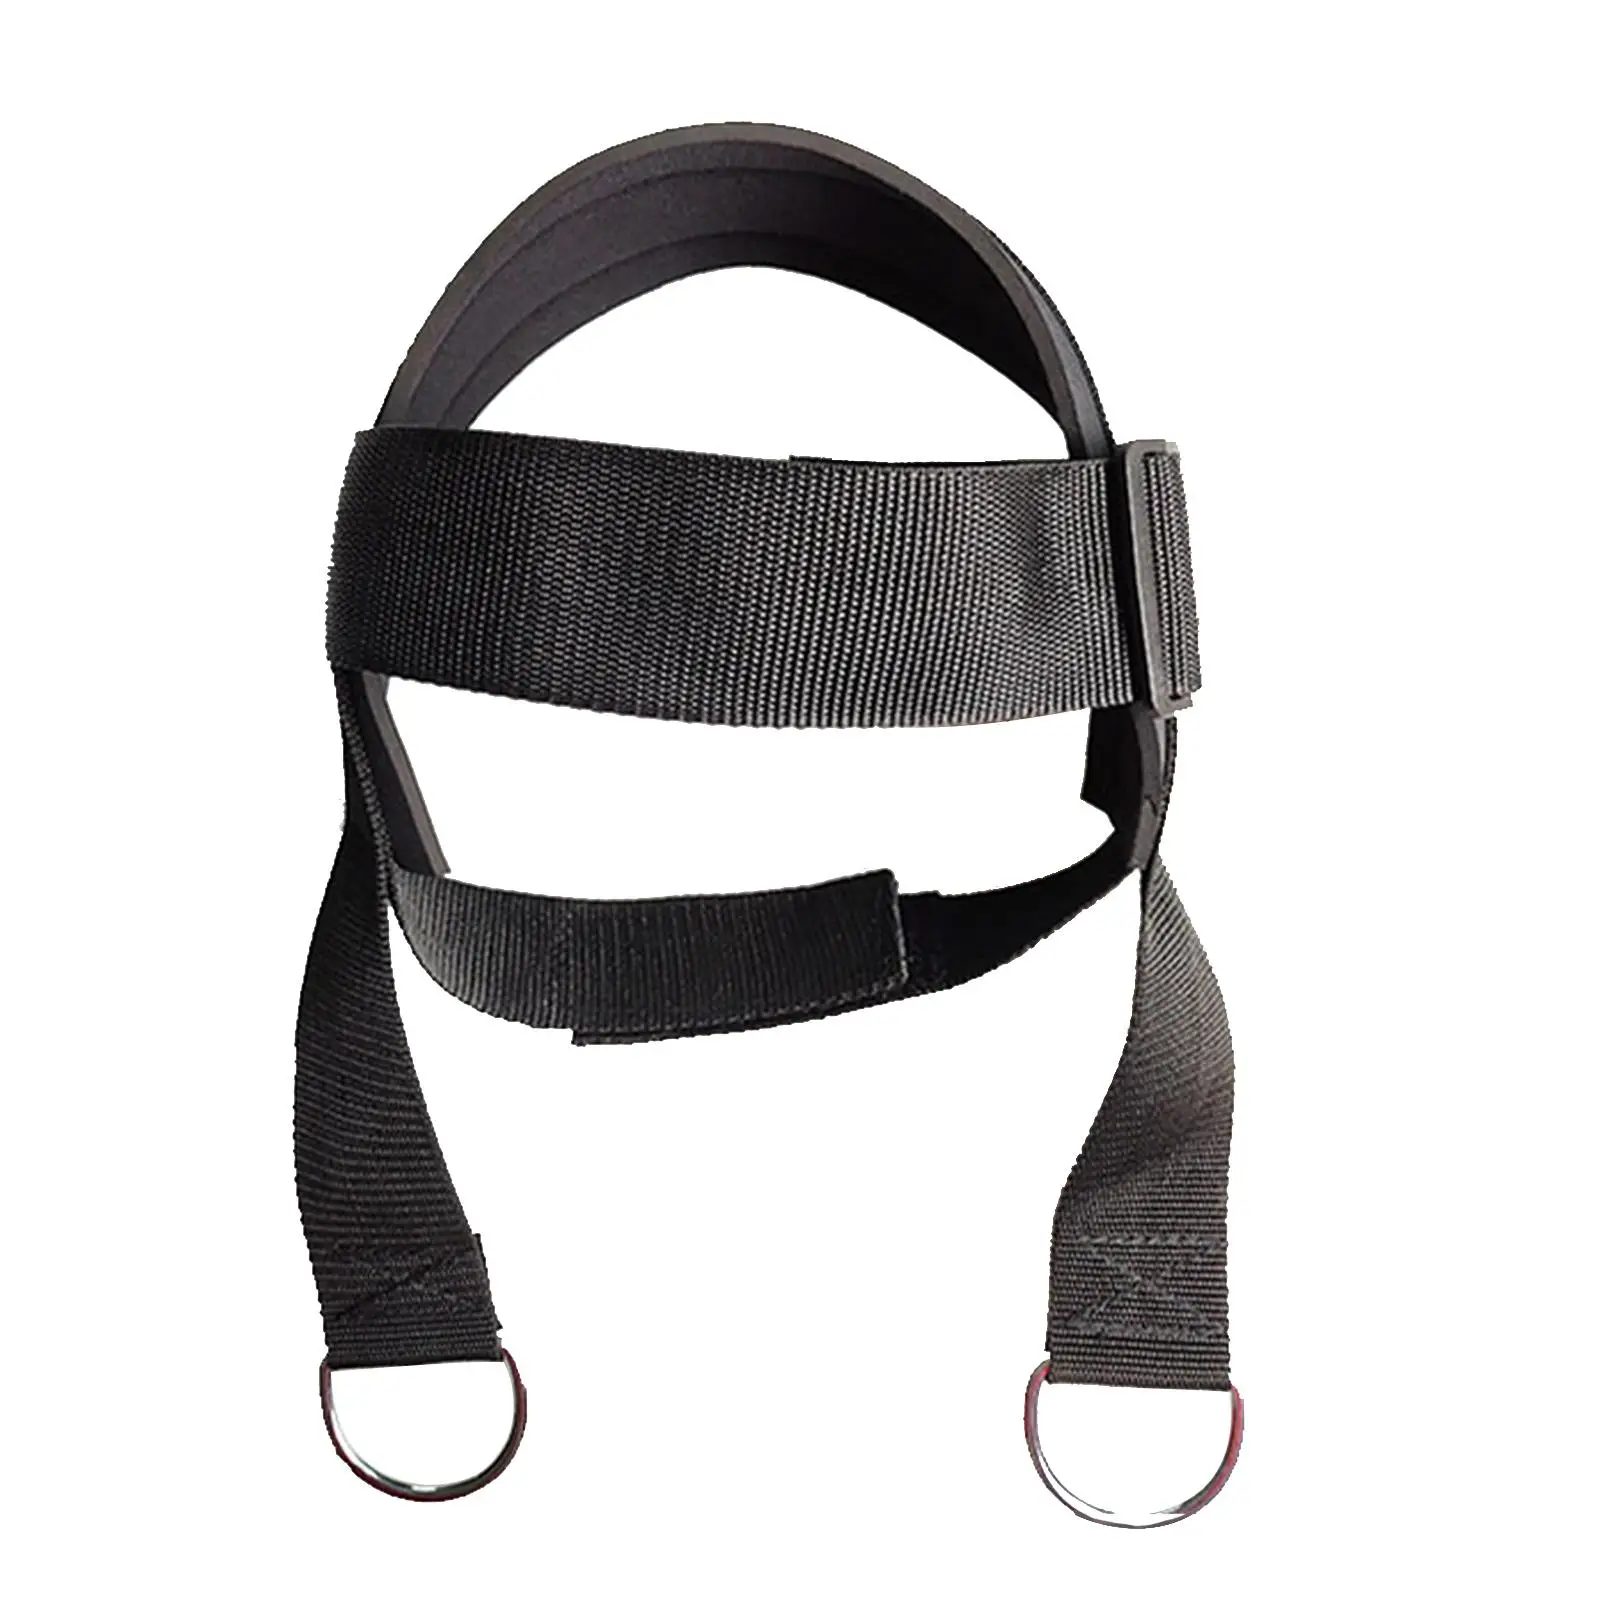 Head Neck Harness Equipment with Metal Loop Muscle Building Exercise Weight Lifting for Fitness Workout Women Men Trainer Home